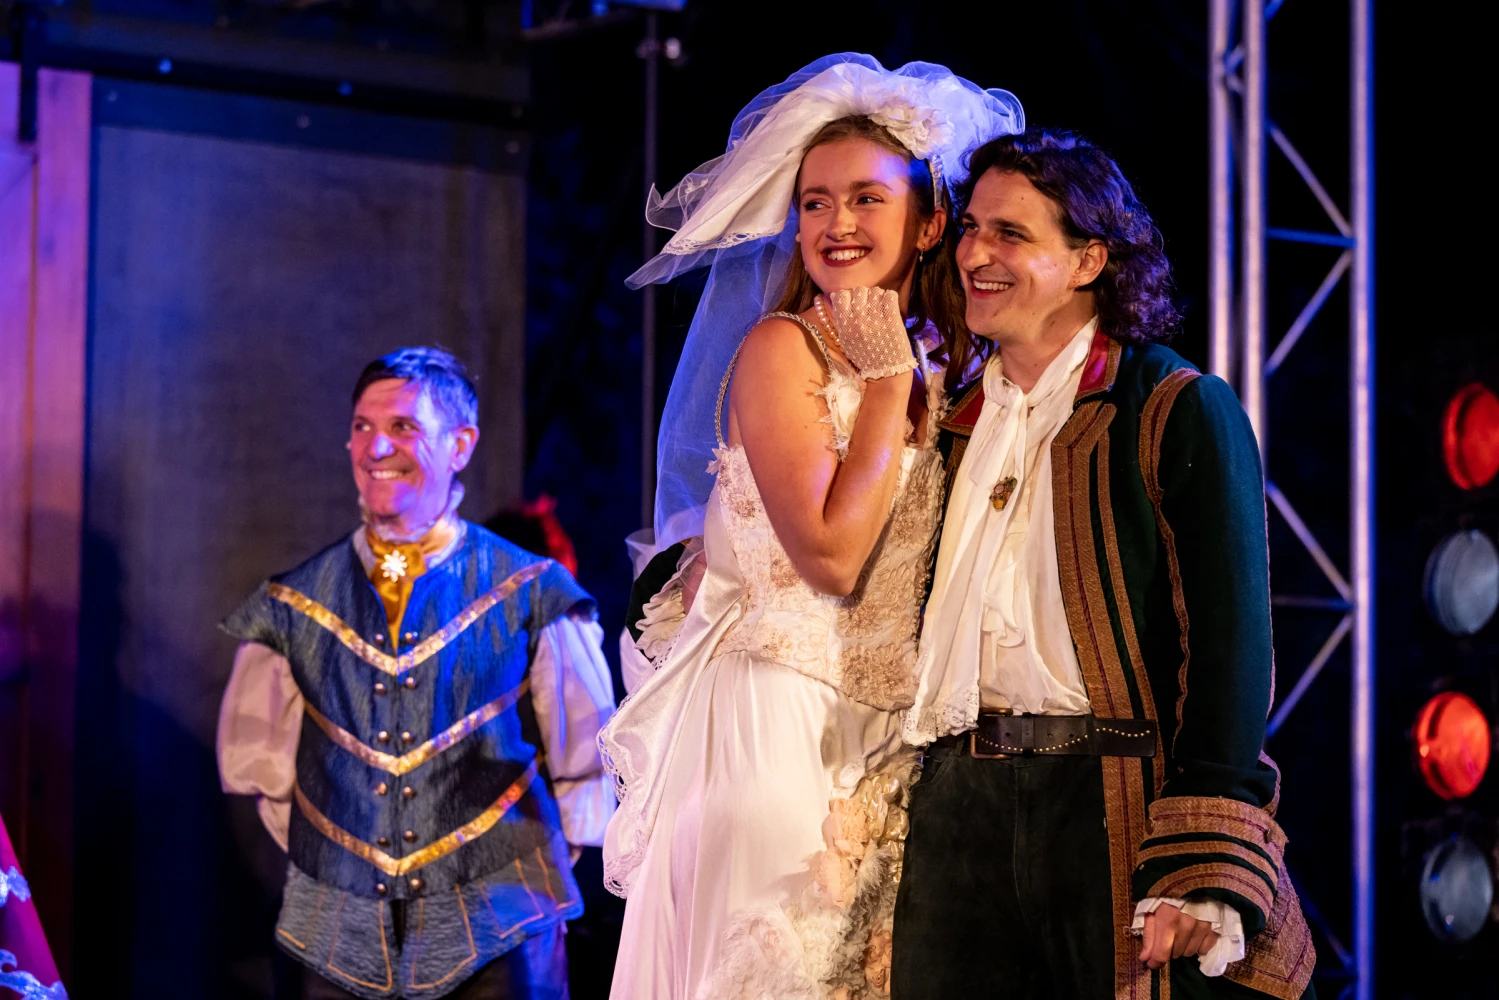 Much Ado About Nothing presented by The Australian Shakespeare Company: What to expect - 6